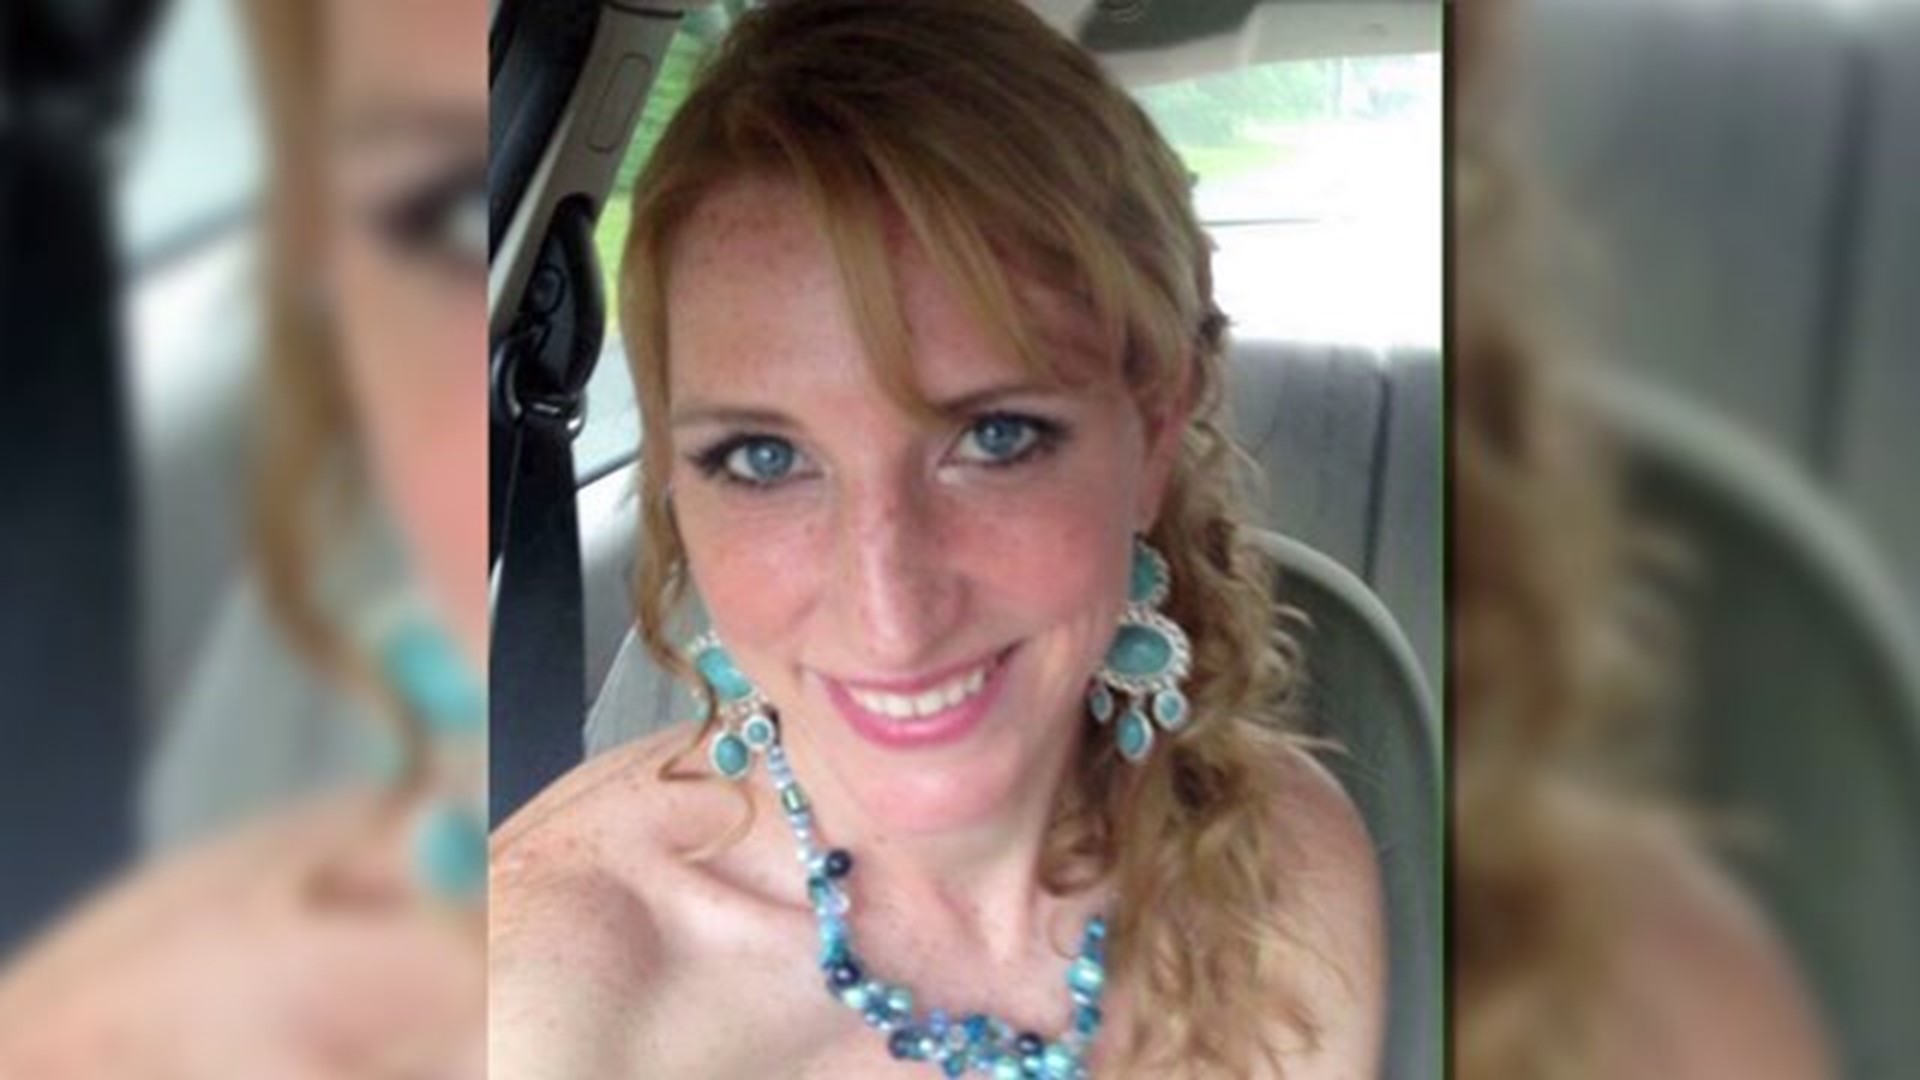 Friends and family gather to remember beloved Ellington mom killed 1 year ago